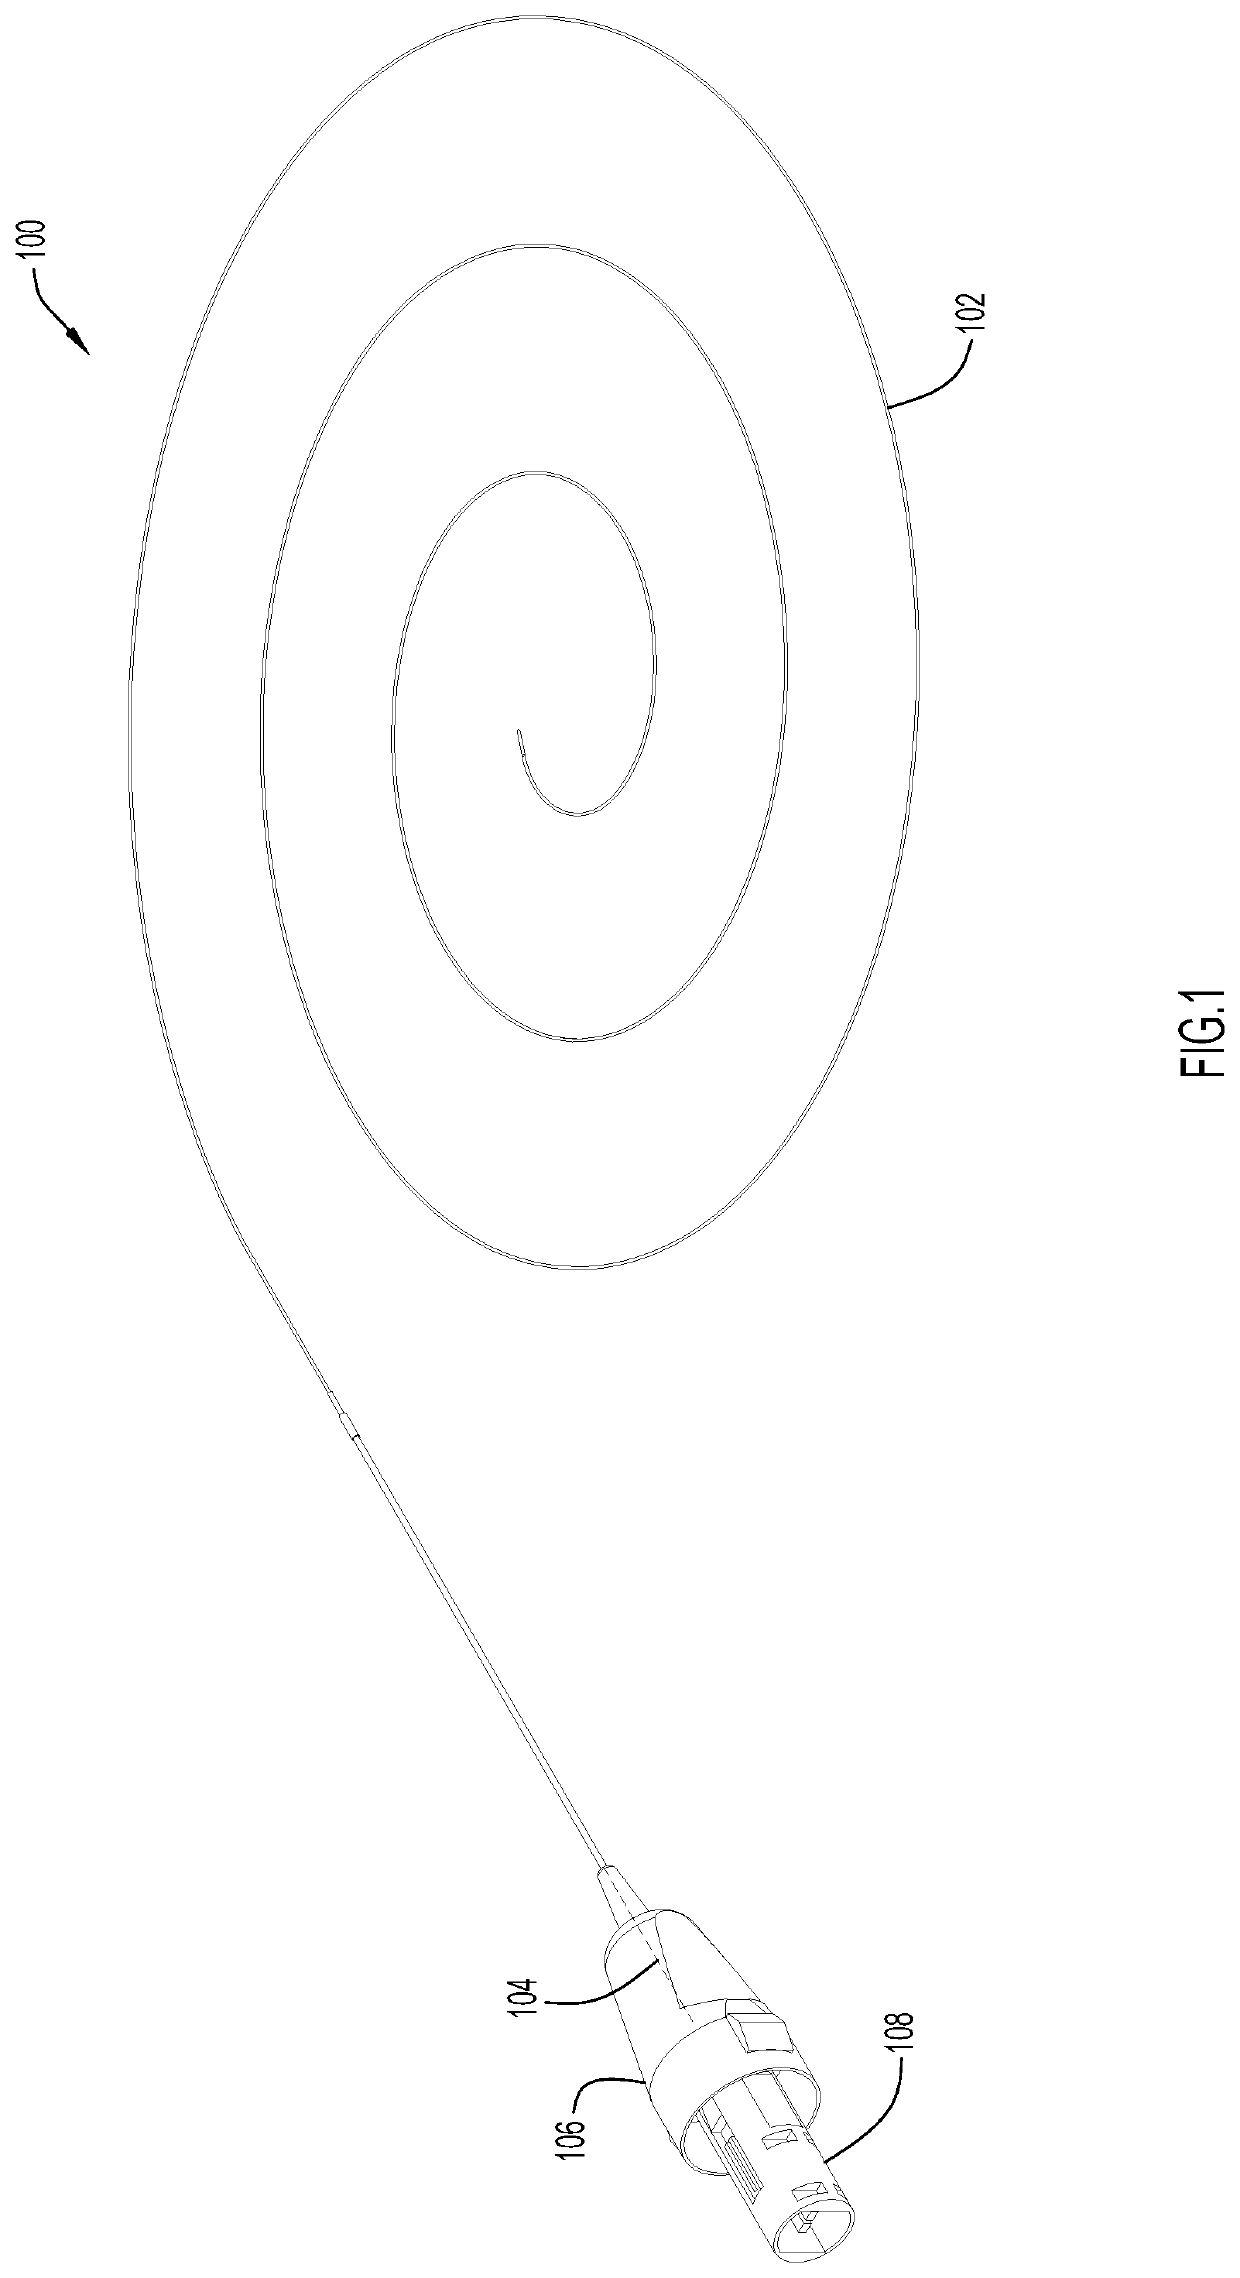 Intravascular Imaging System with Force Error Detection and Remediation